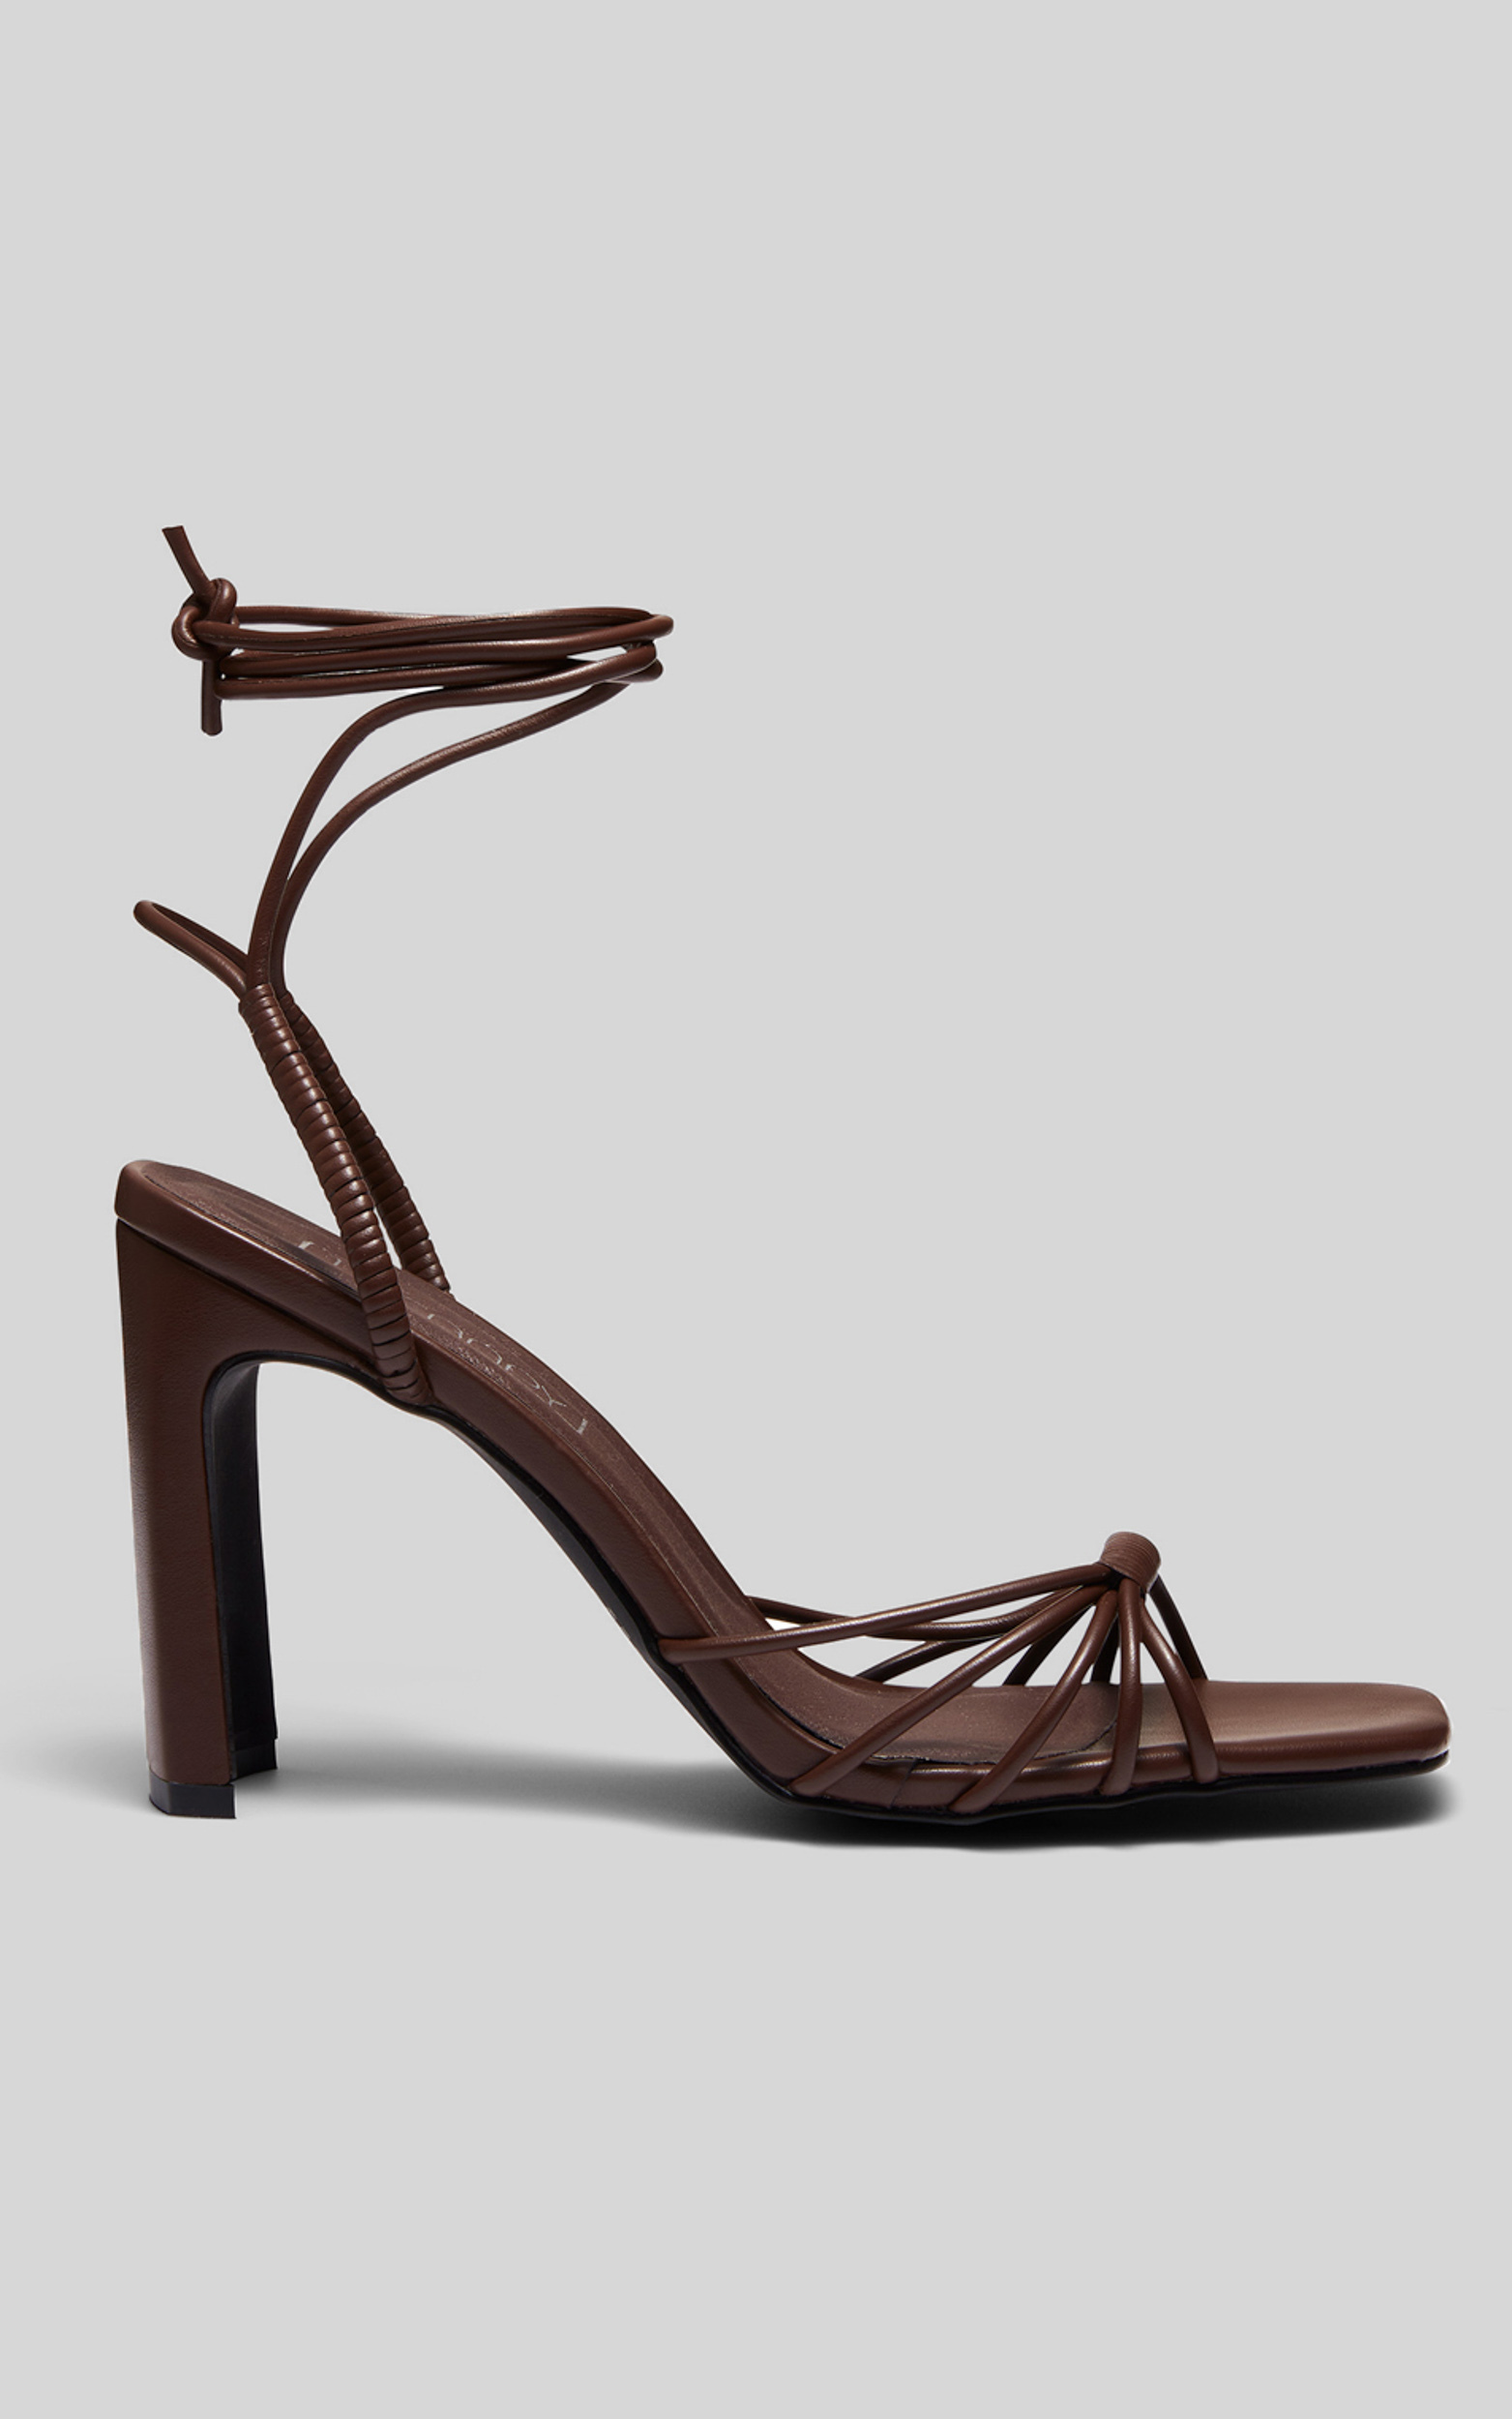 Therapy - Bexley Heels in Chocolate - 05, BRN2, hi-res image number null